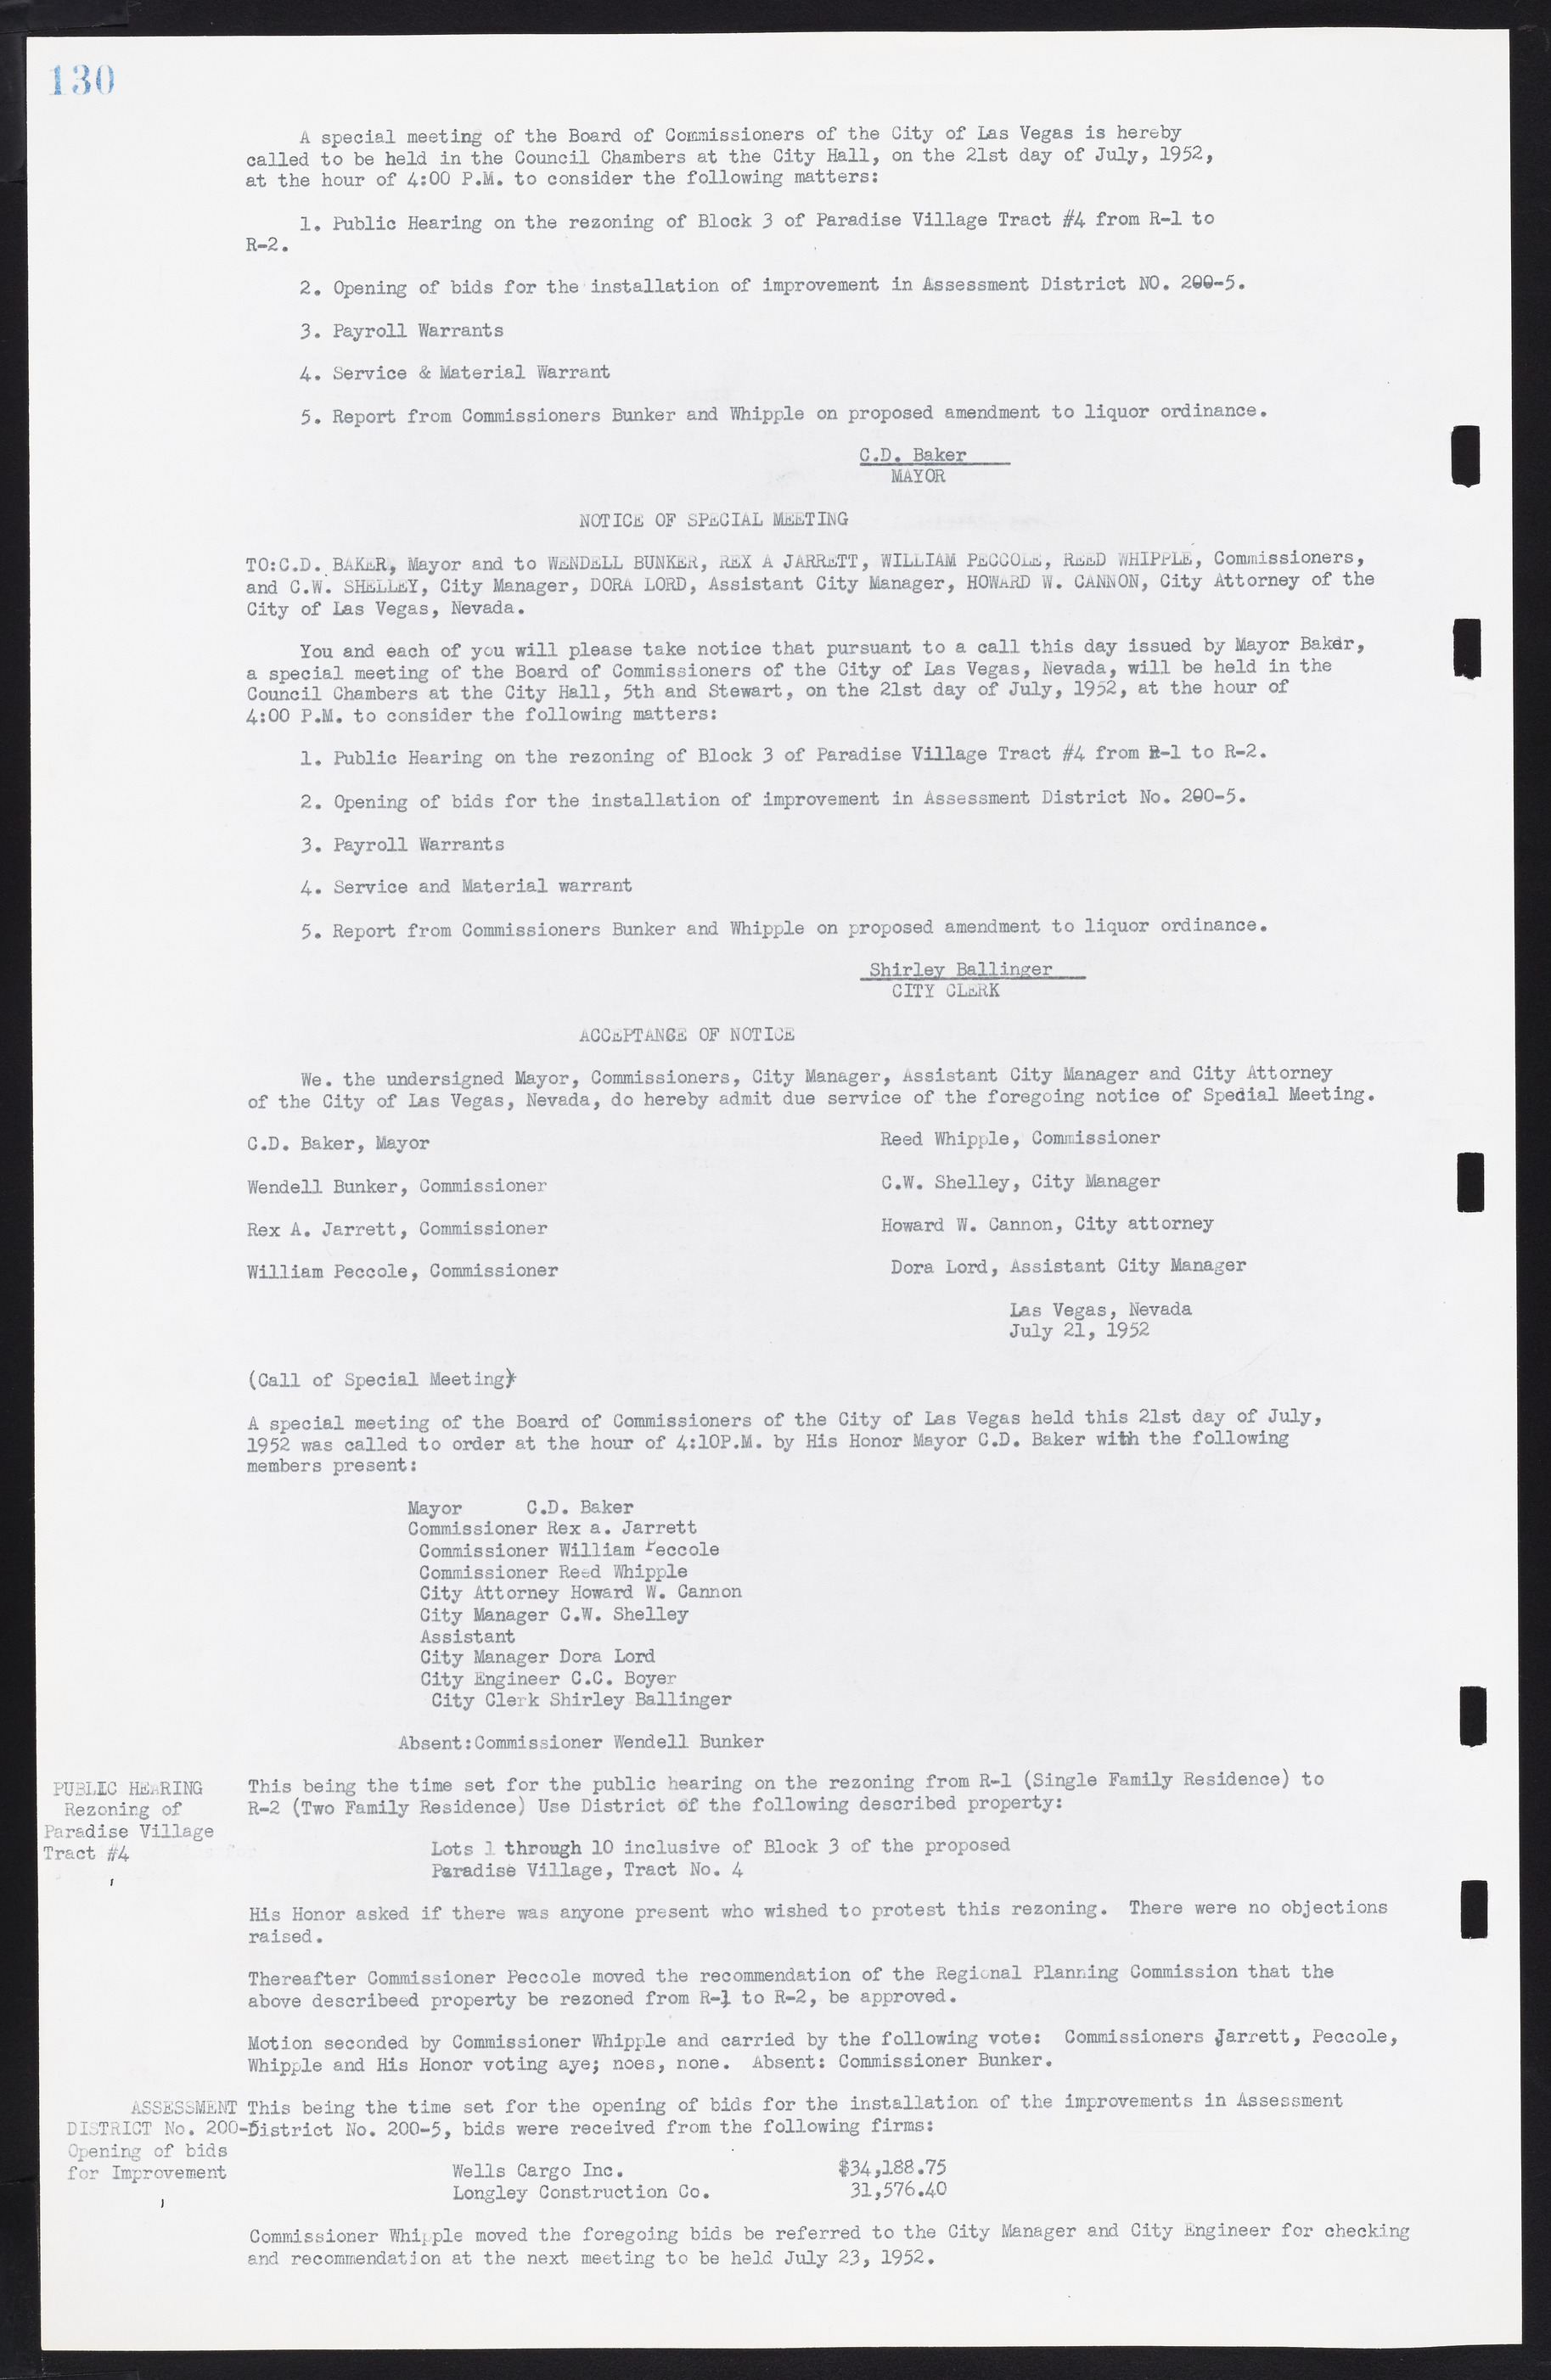 Las Vegas City Commission Minutes, May 26, 1952 to February 17, 1954, lvc000008-136